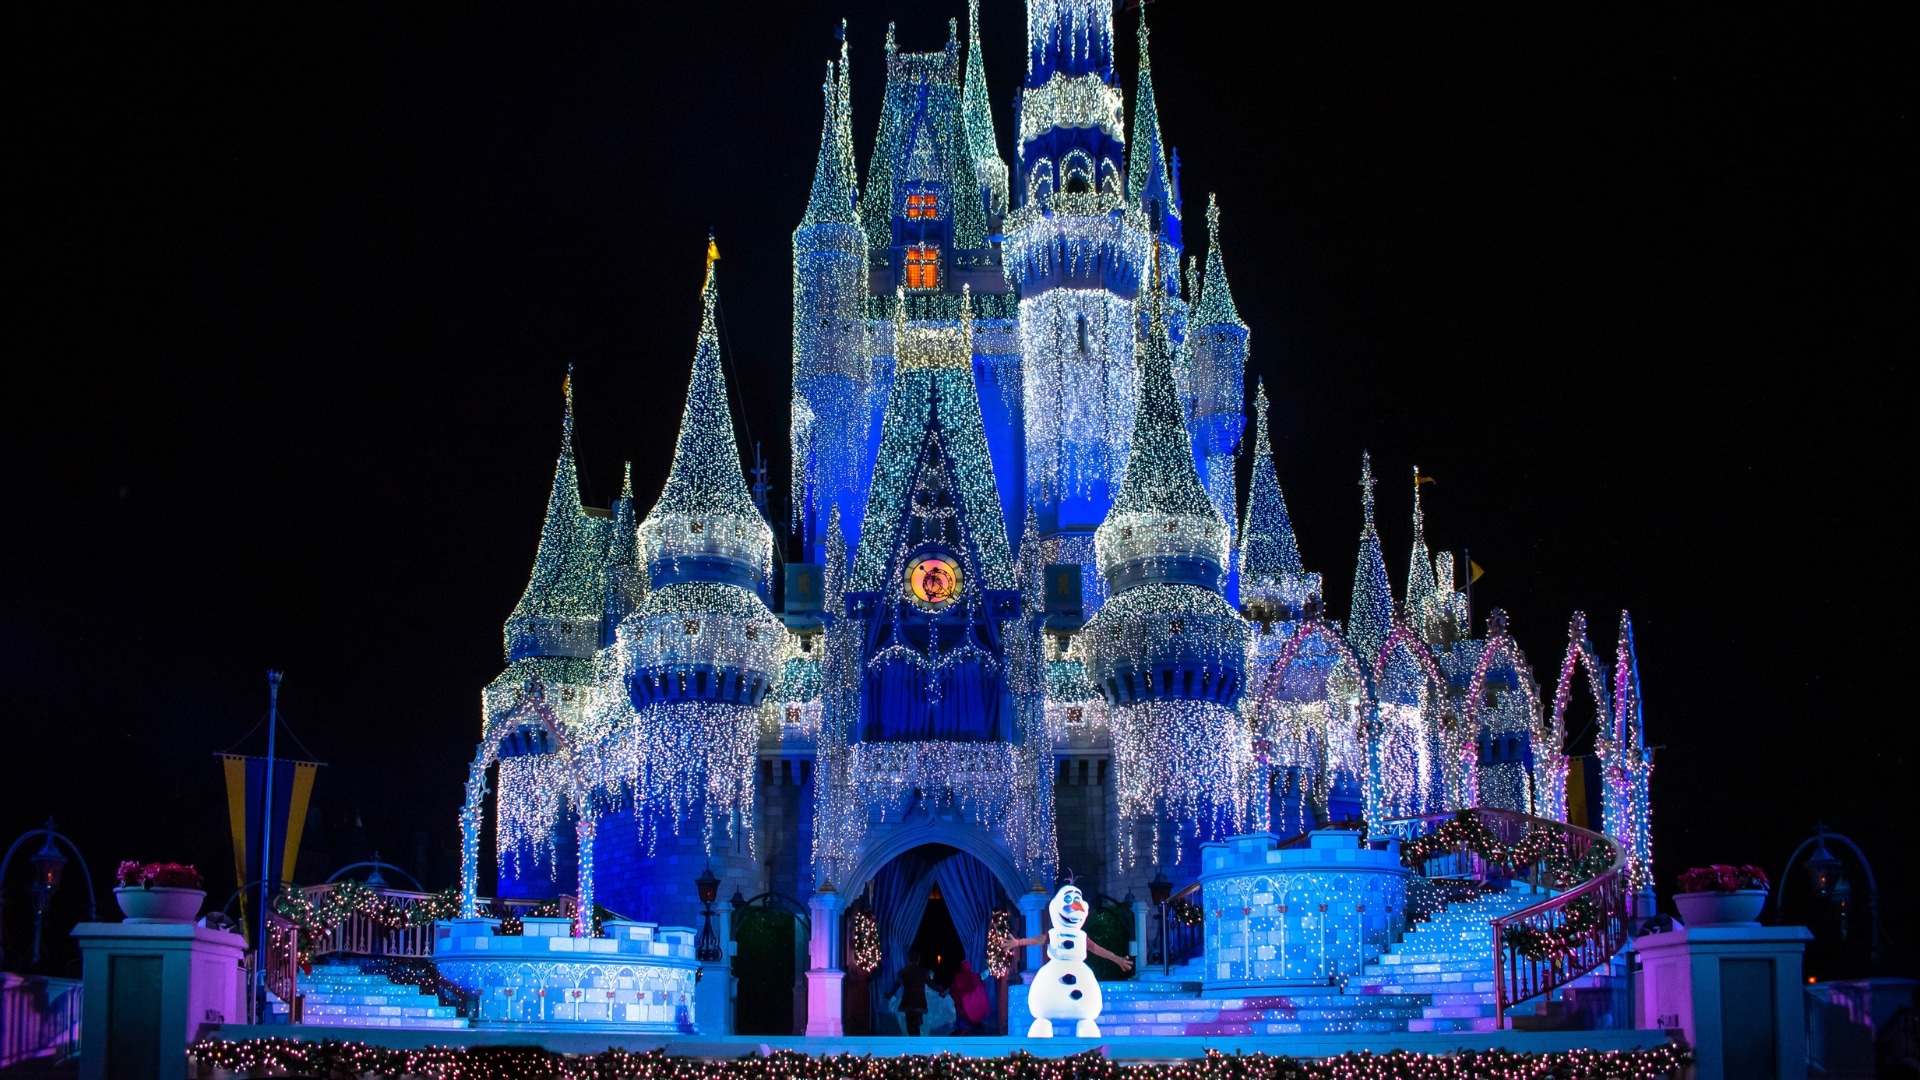 Orlando Winter Attractions and Events